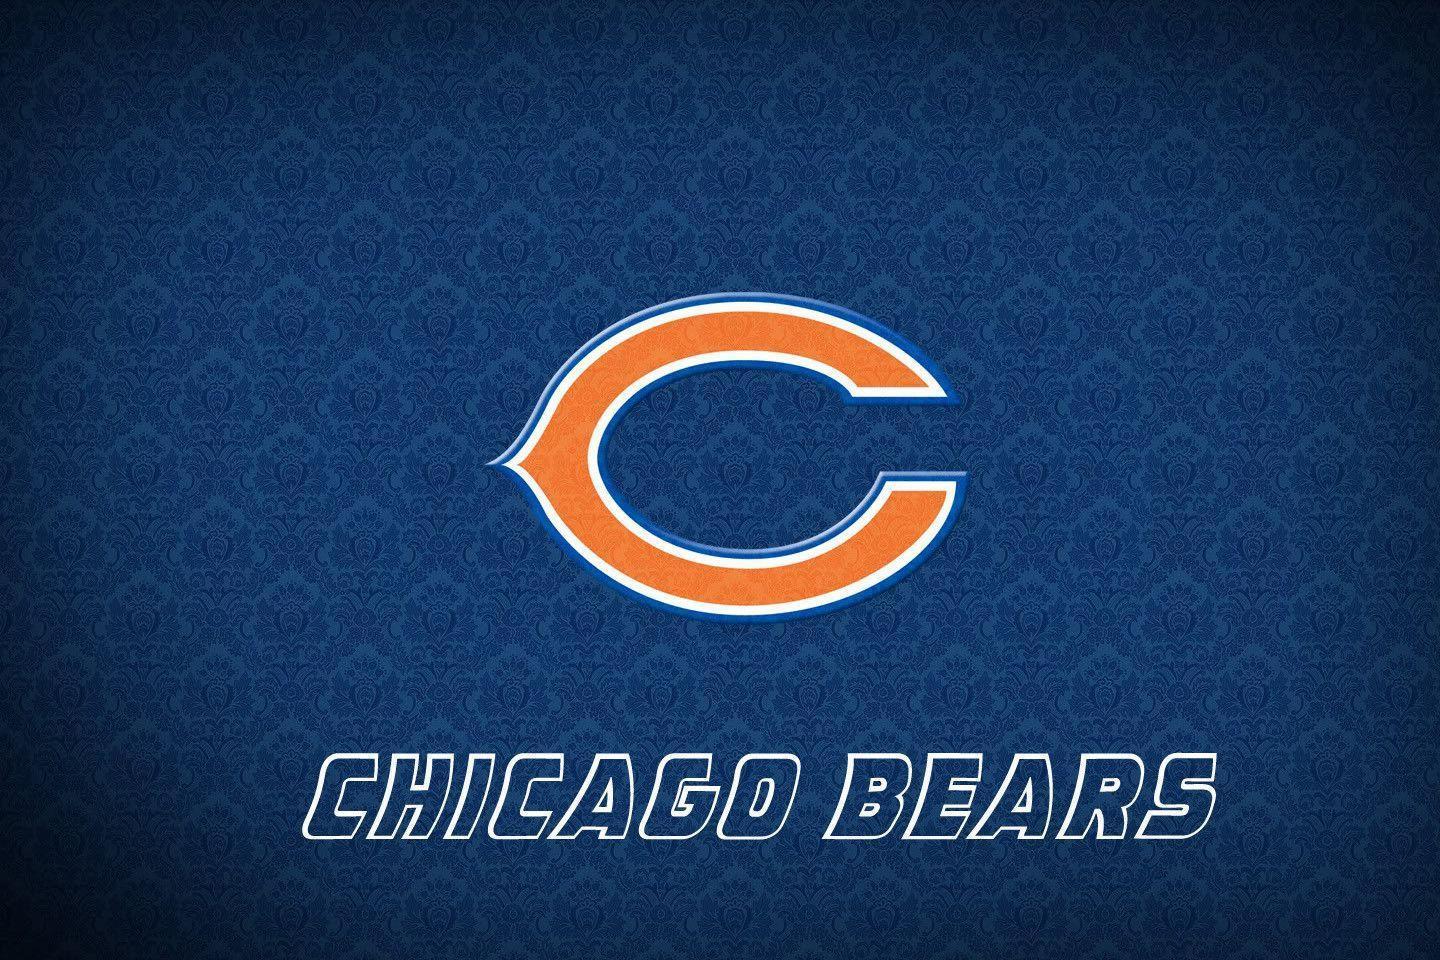 NFL Team Chicago Bears Logos Wallpaper. Download High Quality